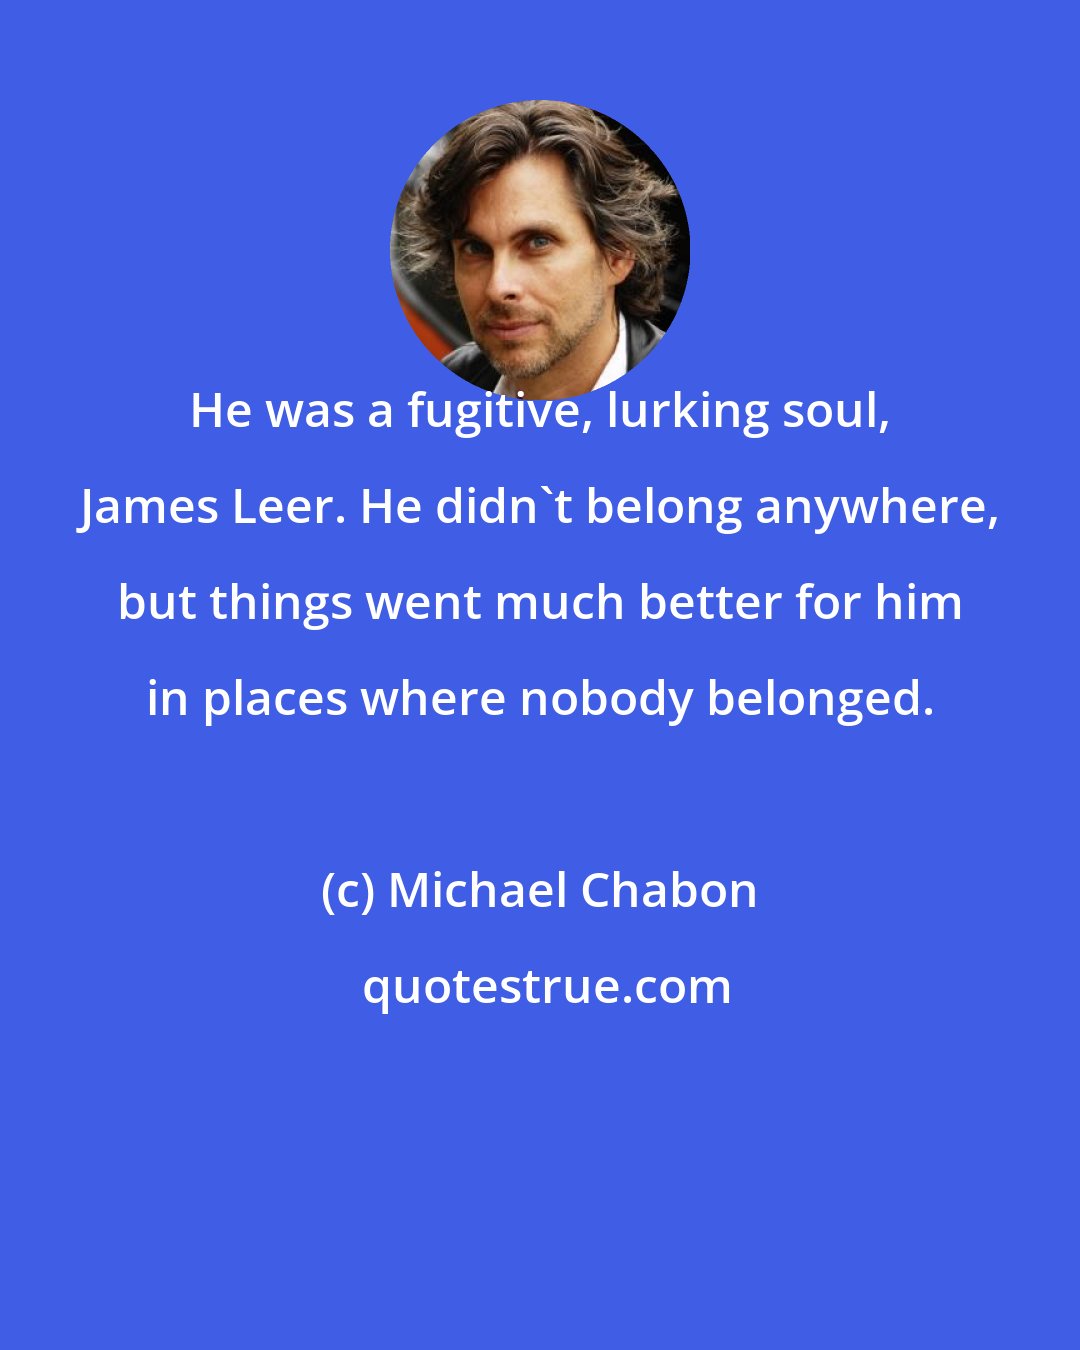 Michael Chabon: He was a fugitive, lurking soul, James Leer. He didn't belong anywhere, but things went much better for him in places where nobody belonged.